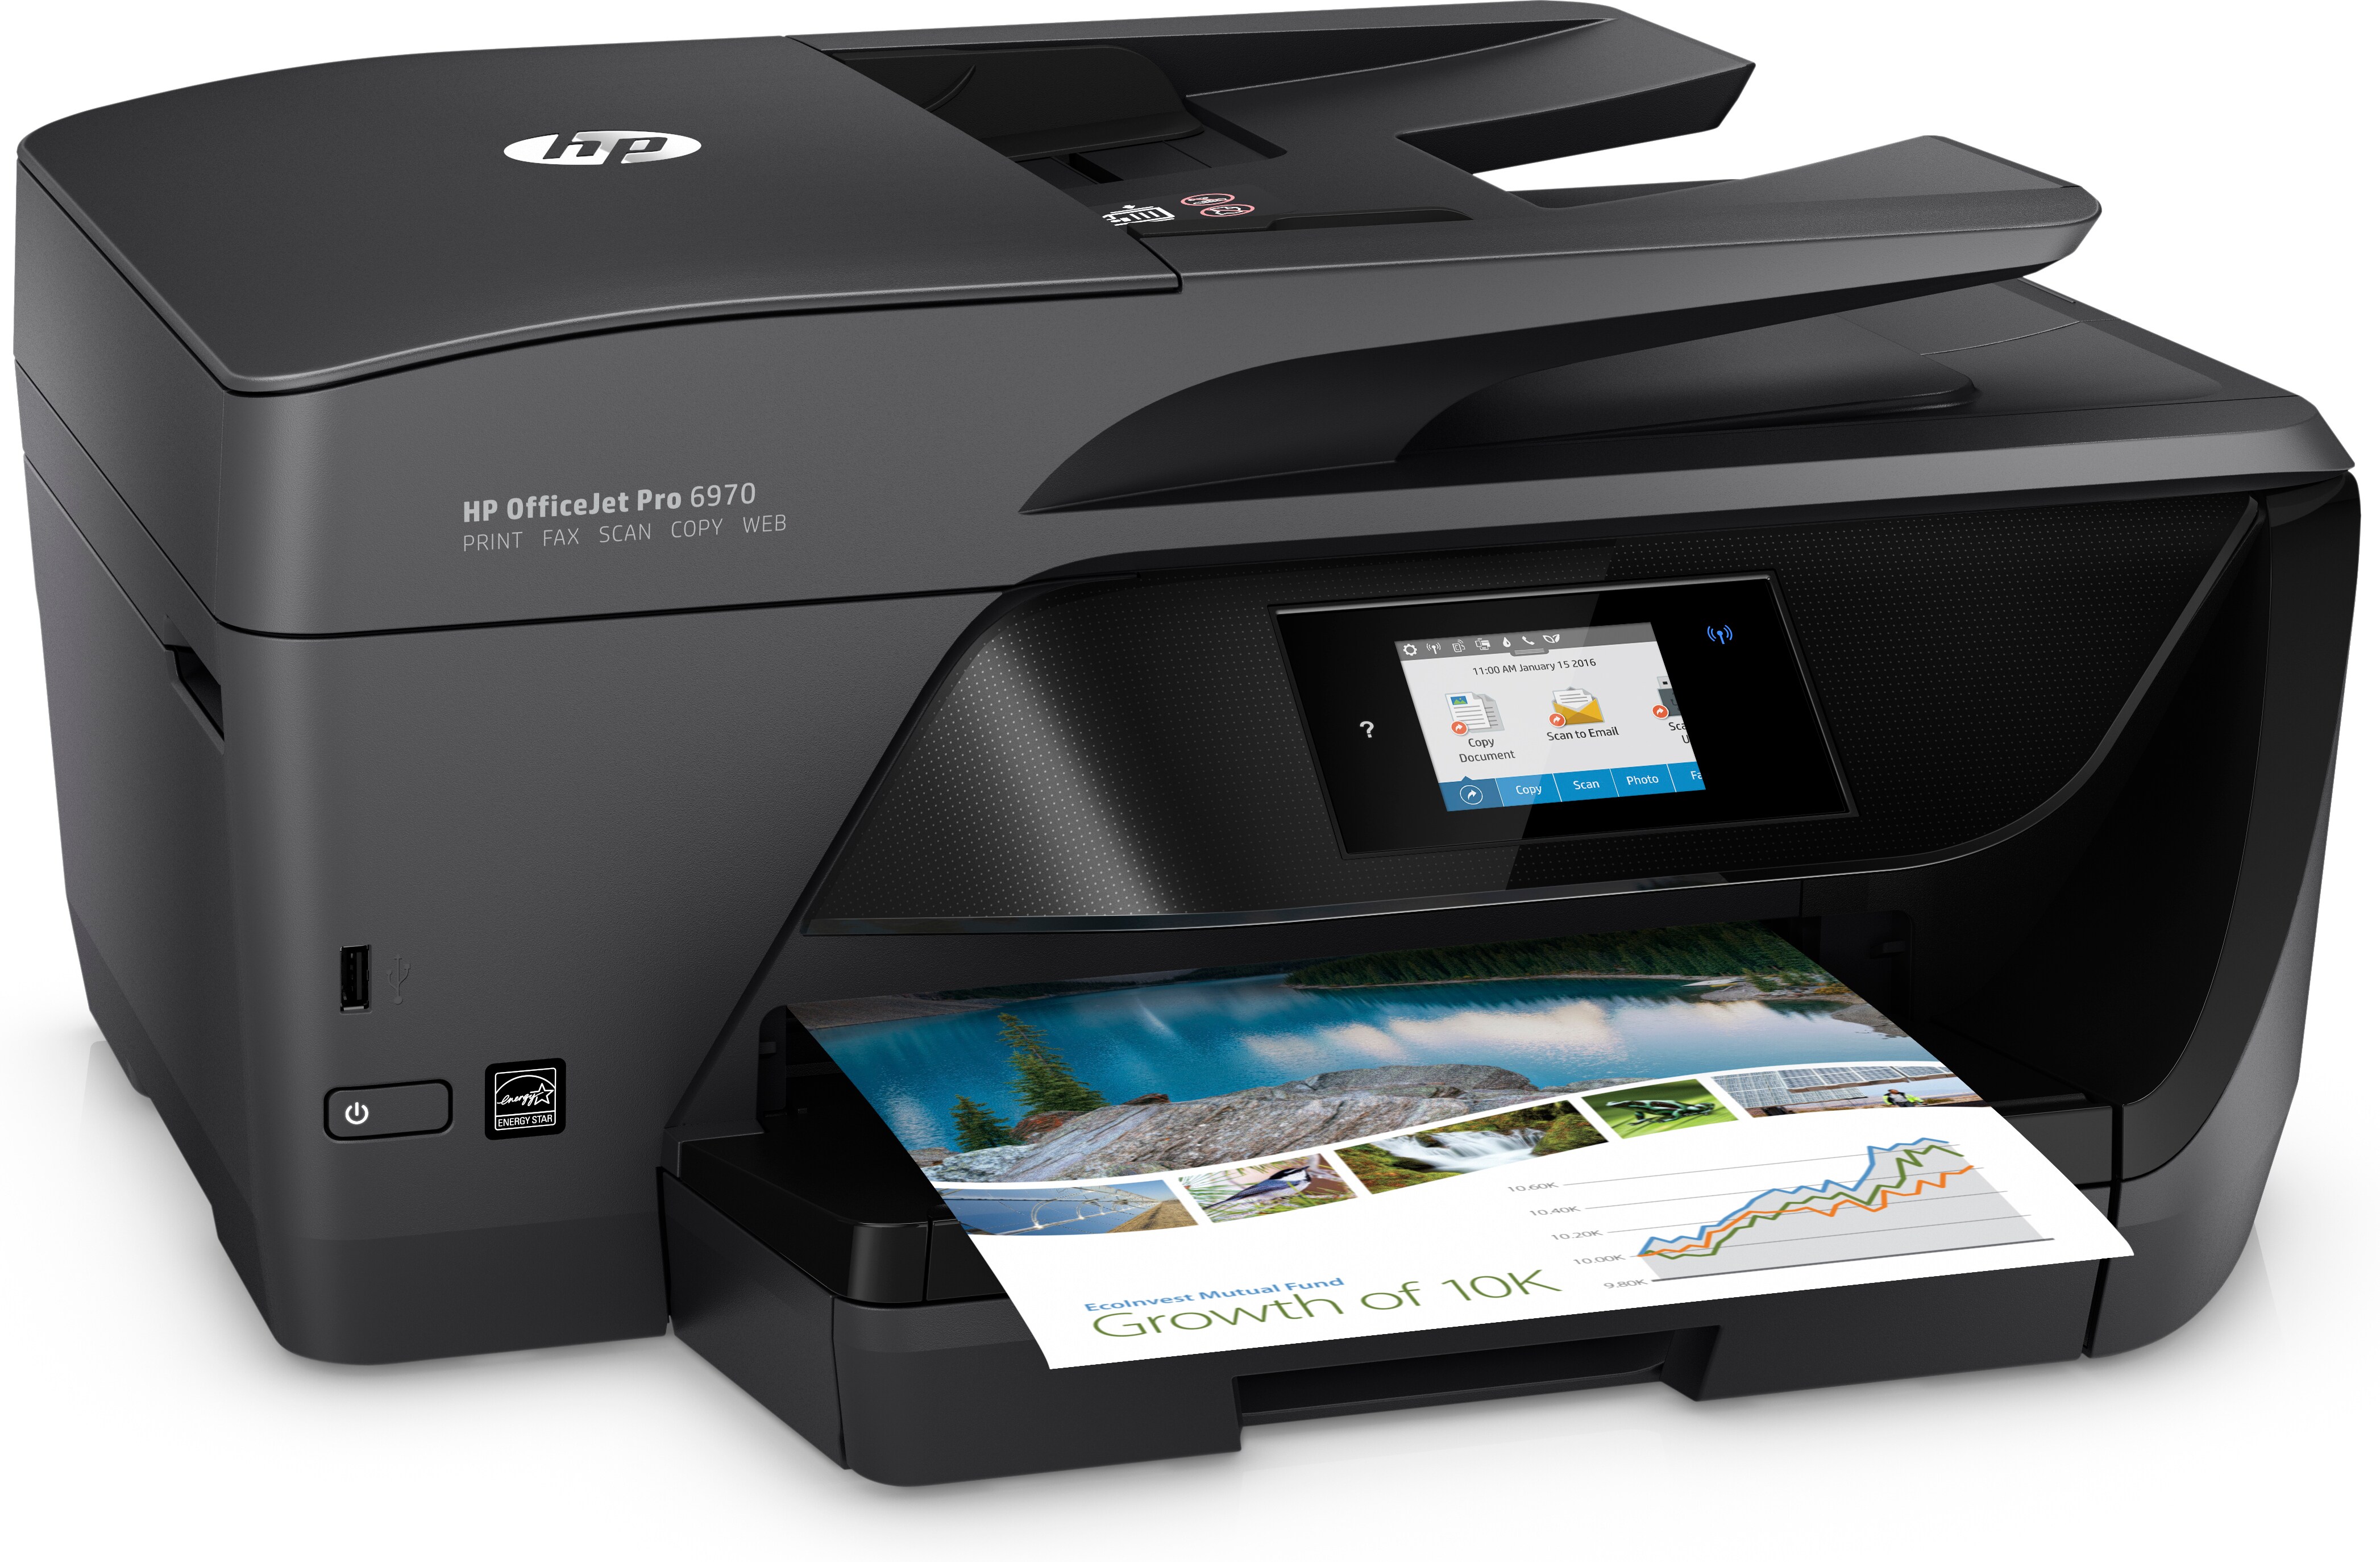 User manual HP OfficeJet 6950 All-in-One (English - 180 pages)